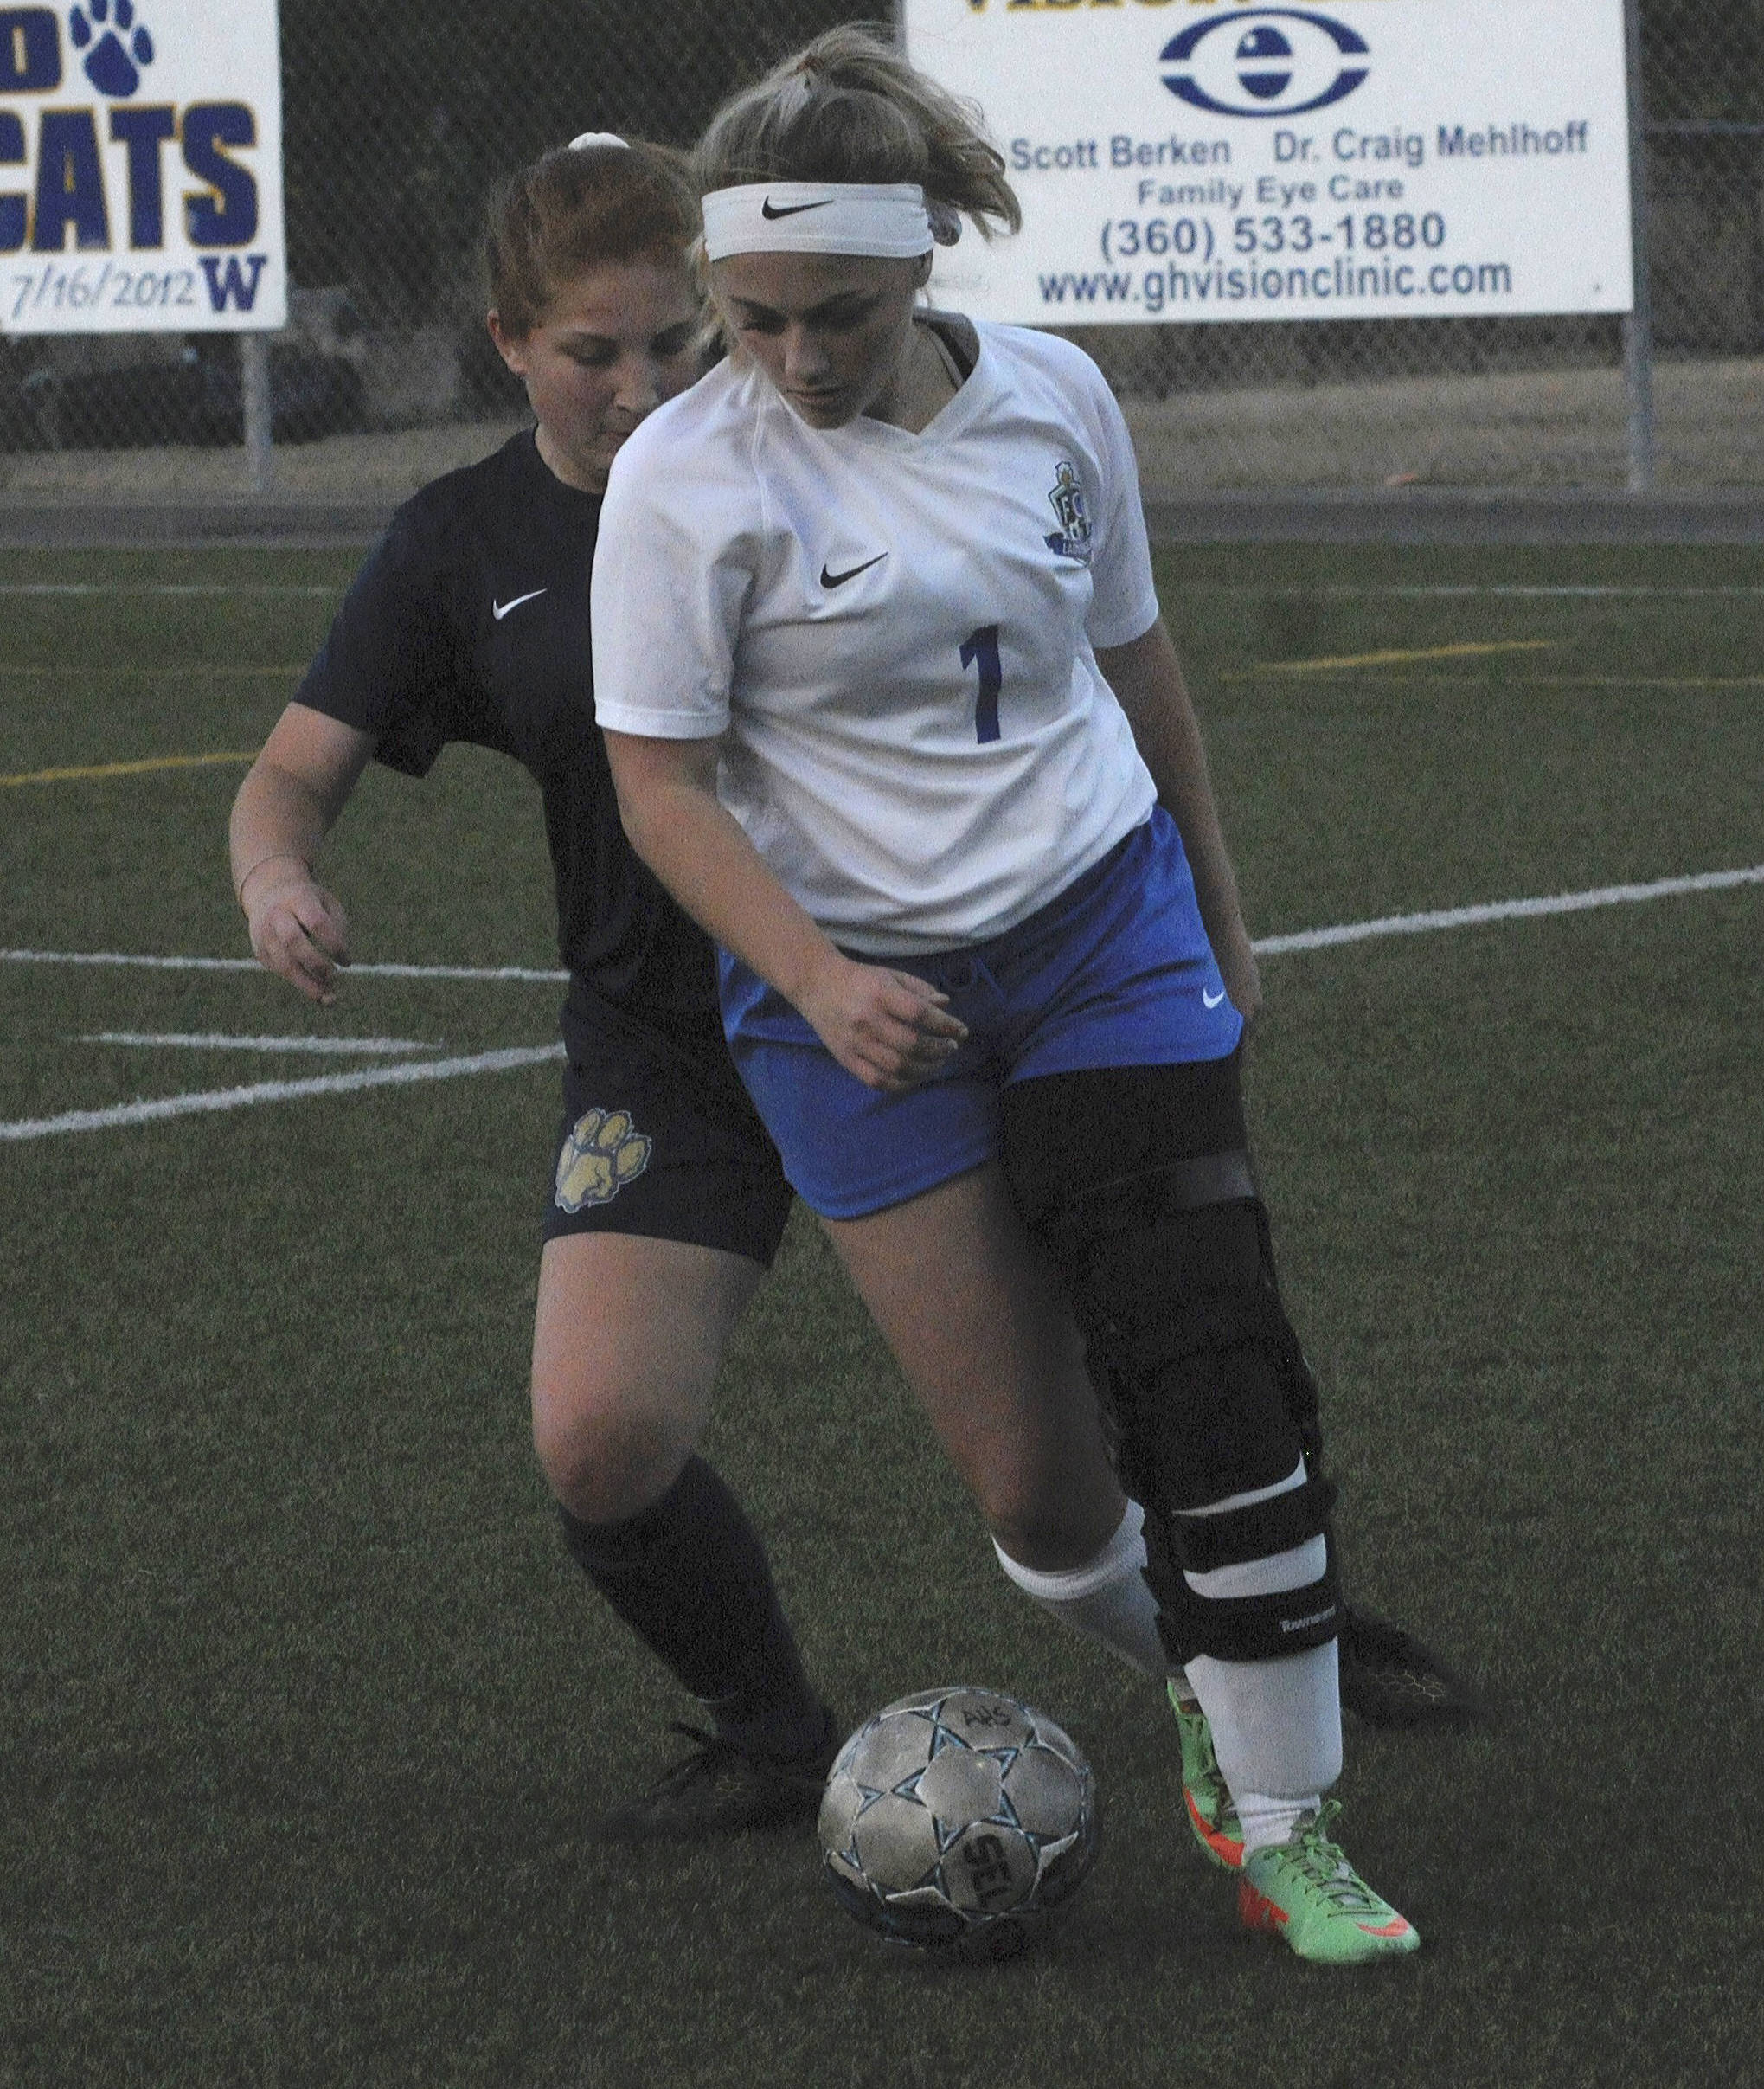 Elma’s Paige Knutson shields the ball from Aberdeen’s Chase Baller near the sidelines Tuesday at Stewart Field.